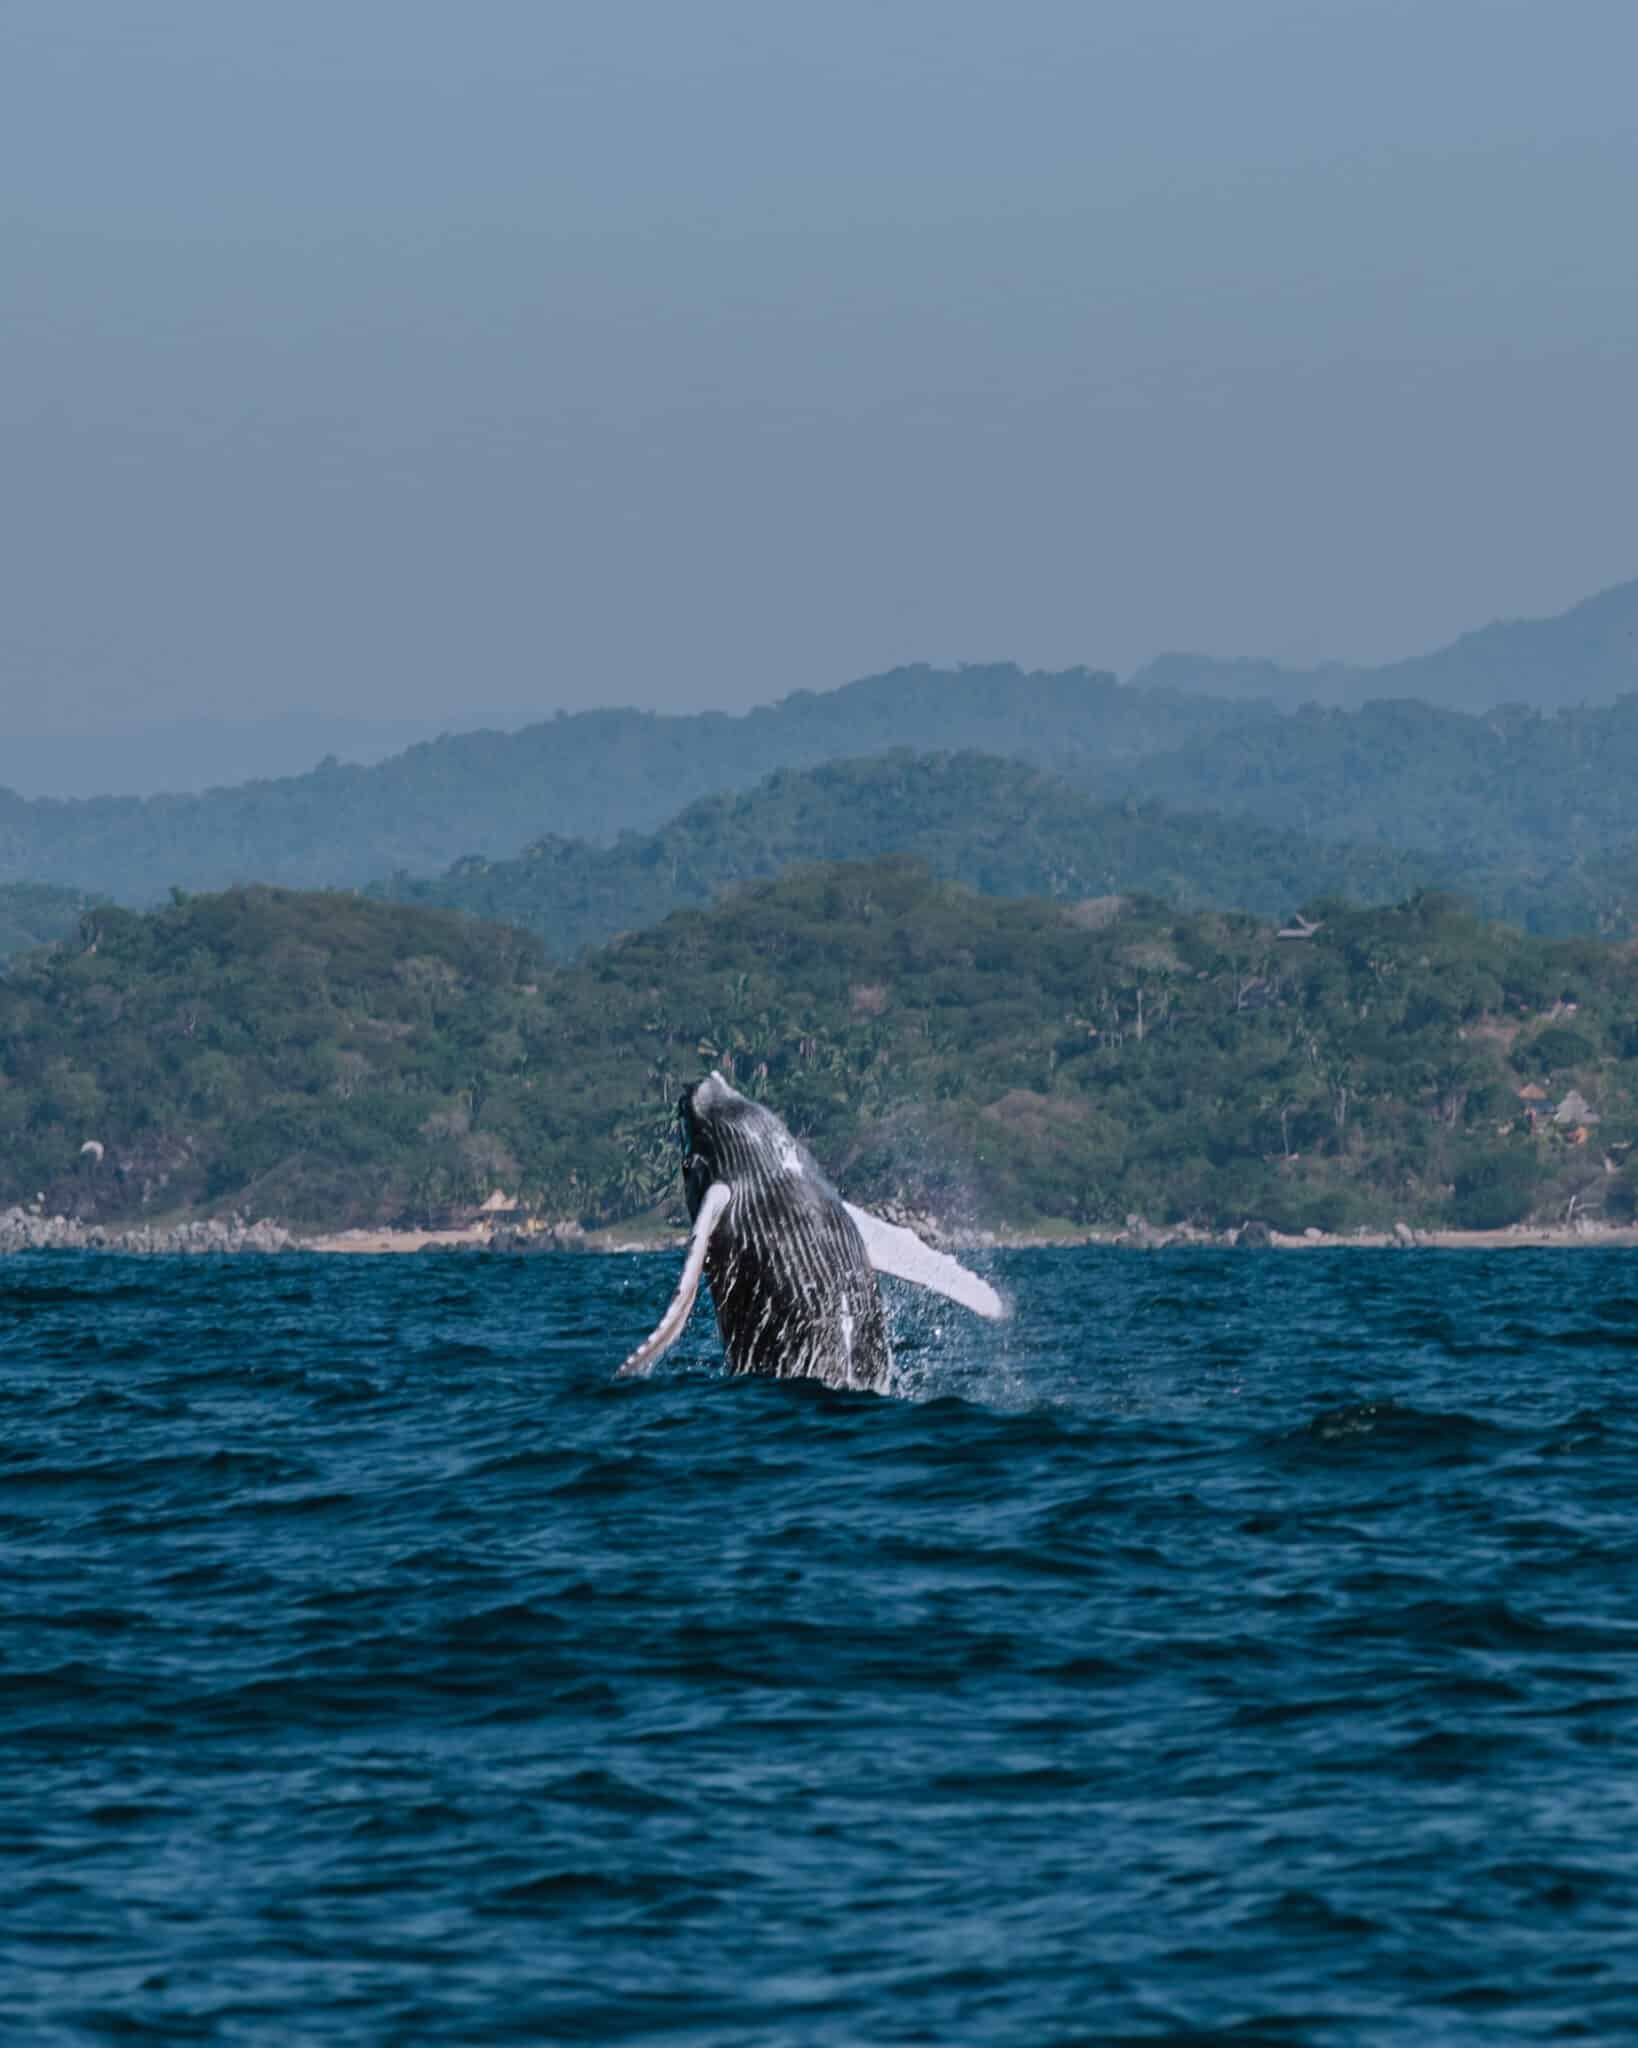 A humpback whale is jumping out of the water near Sayulita.